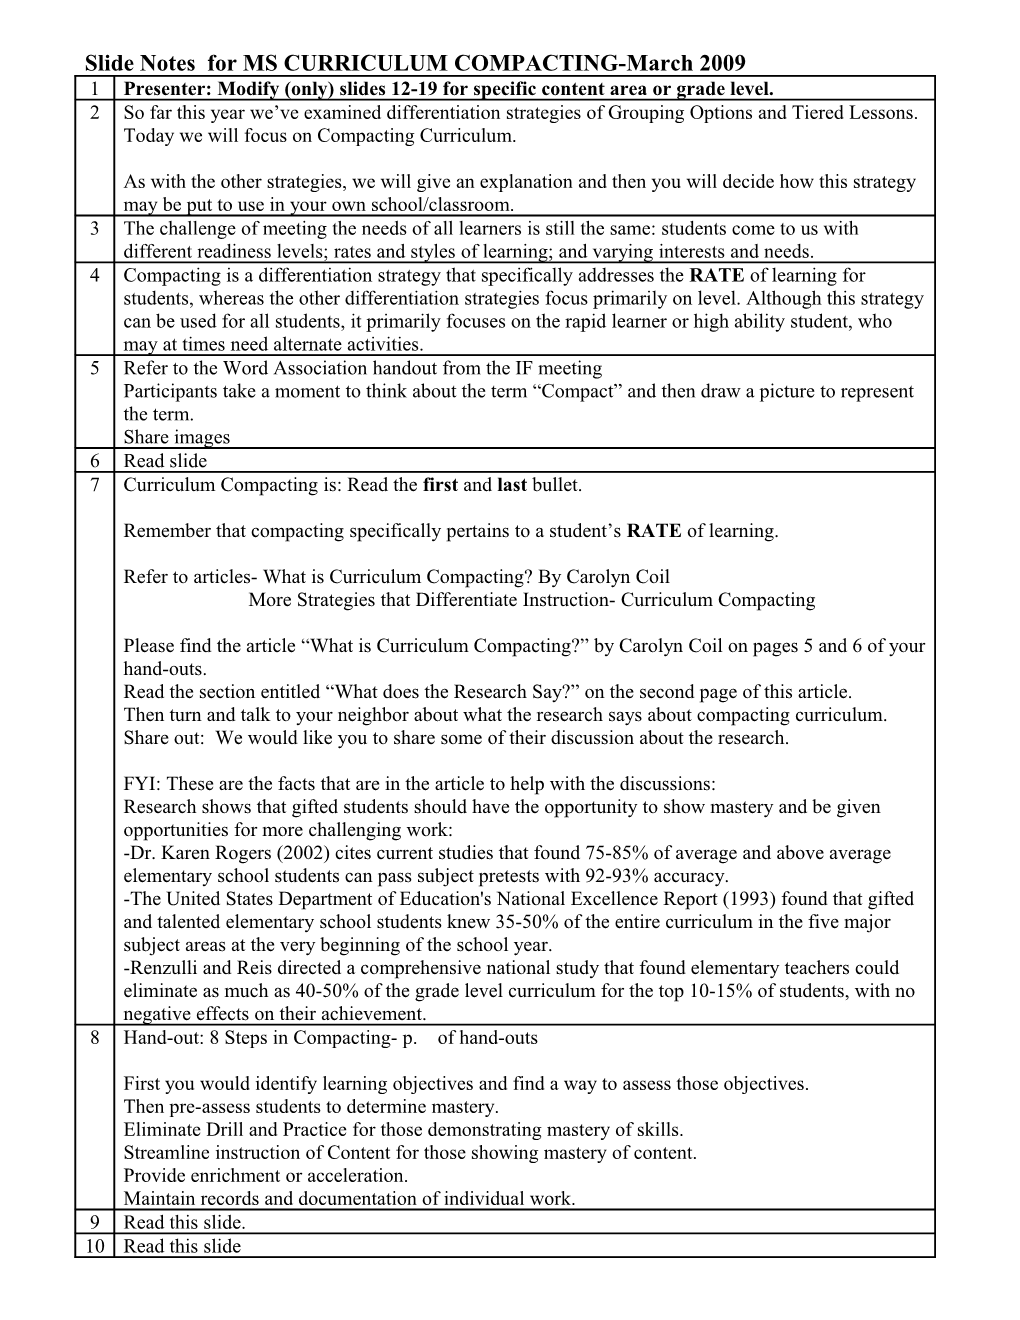 Slide Notes for MS CURRICULUM COMPACTING-March 2009